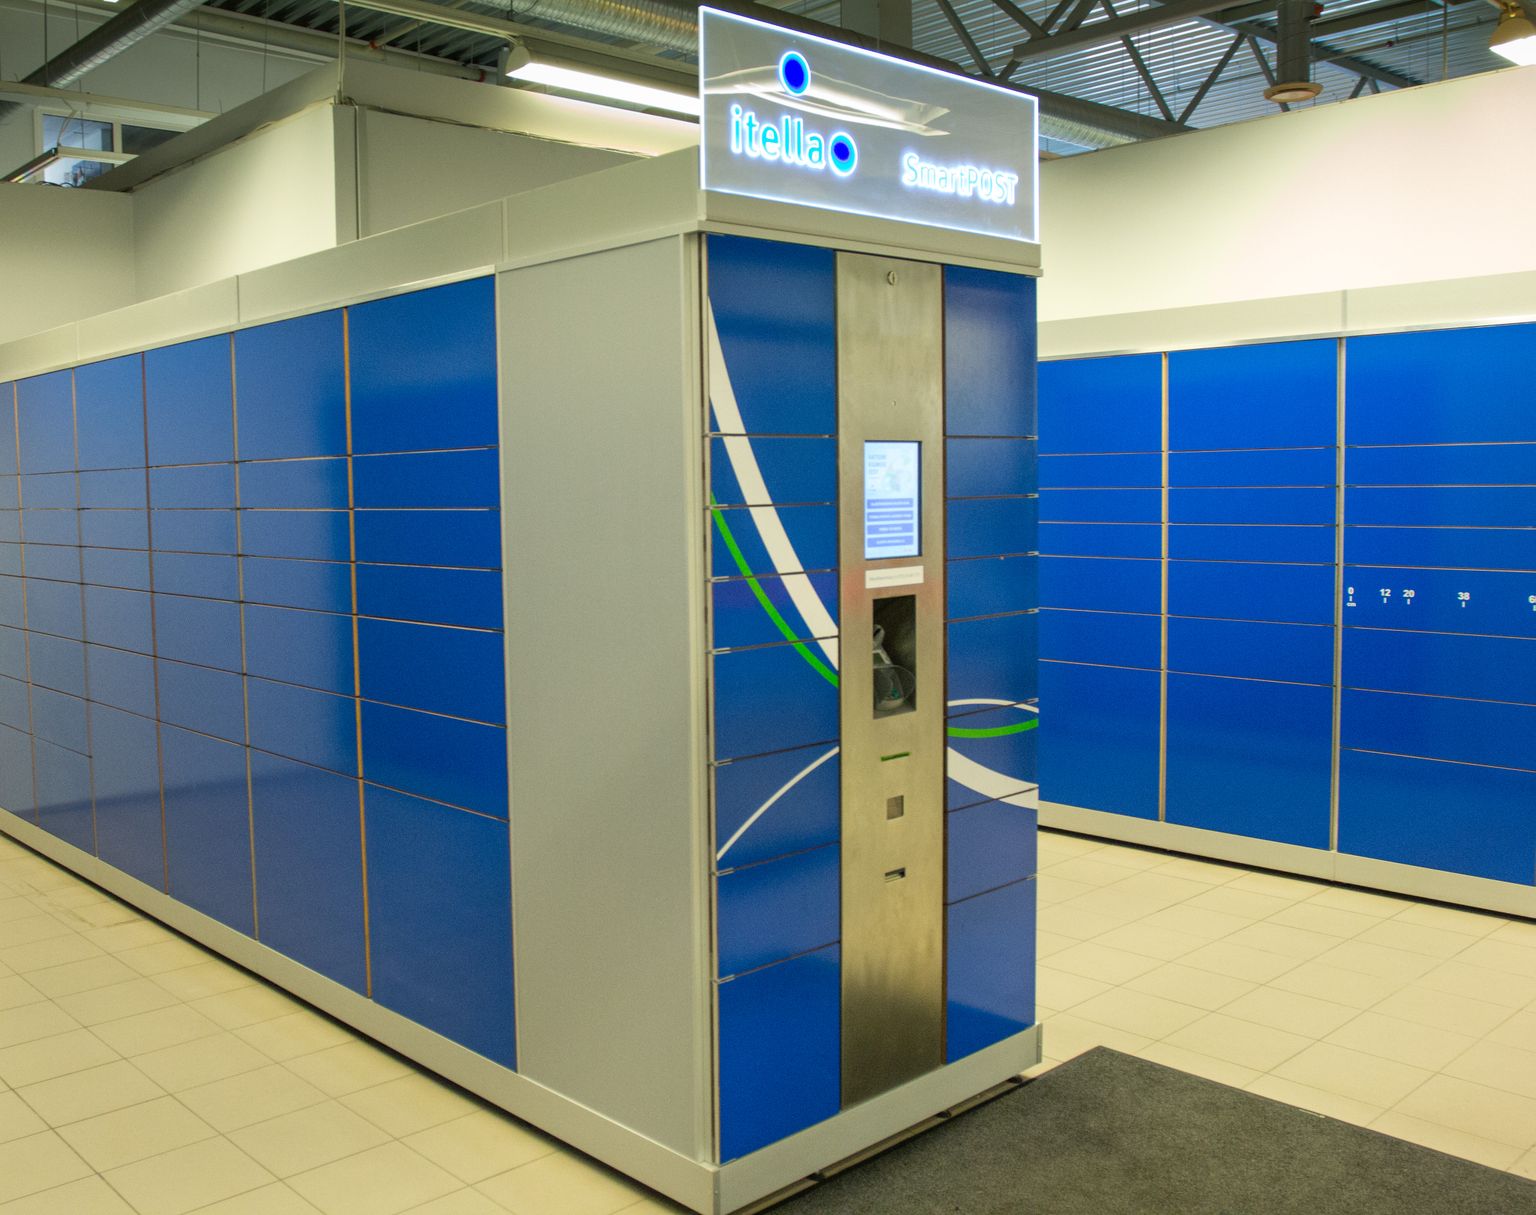 The Central Criminal Police carried out procedural acts in Tallinn earlier this week with regard to two young men who are suspected of breaking into the information system of Itella parcel machines.